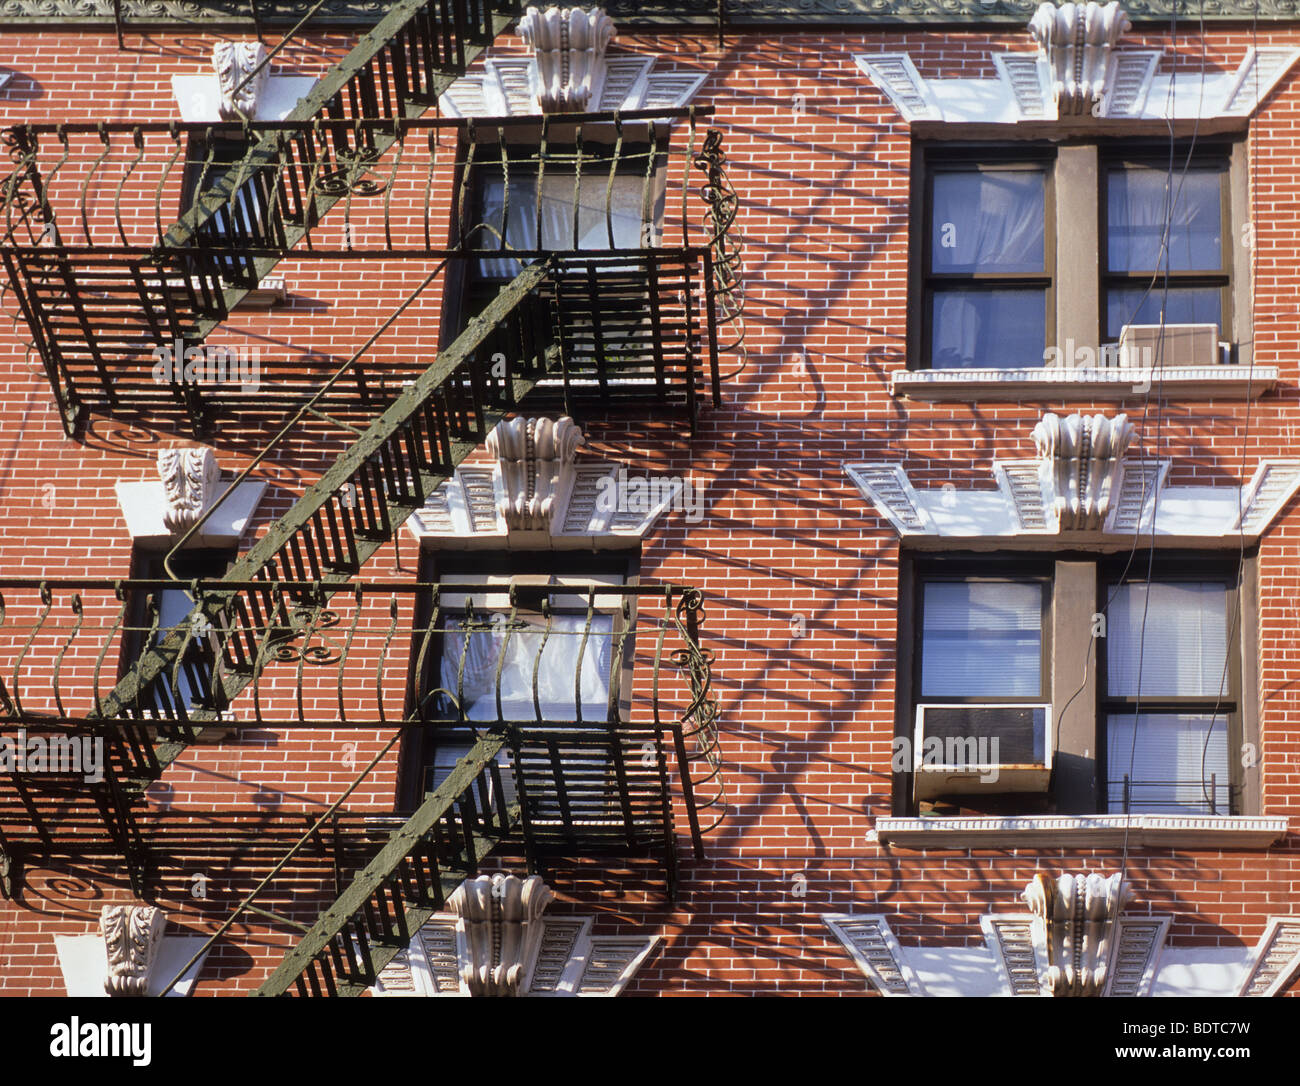 Residential tenement building with fire escapes in New York City. Red brick apartment house built in 19th century. Lower East Side Manhattan USA Stock Photo